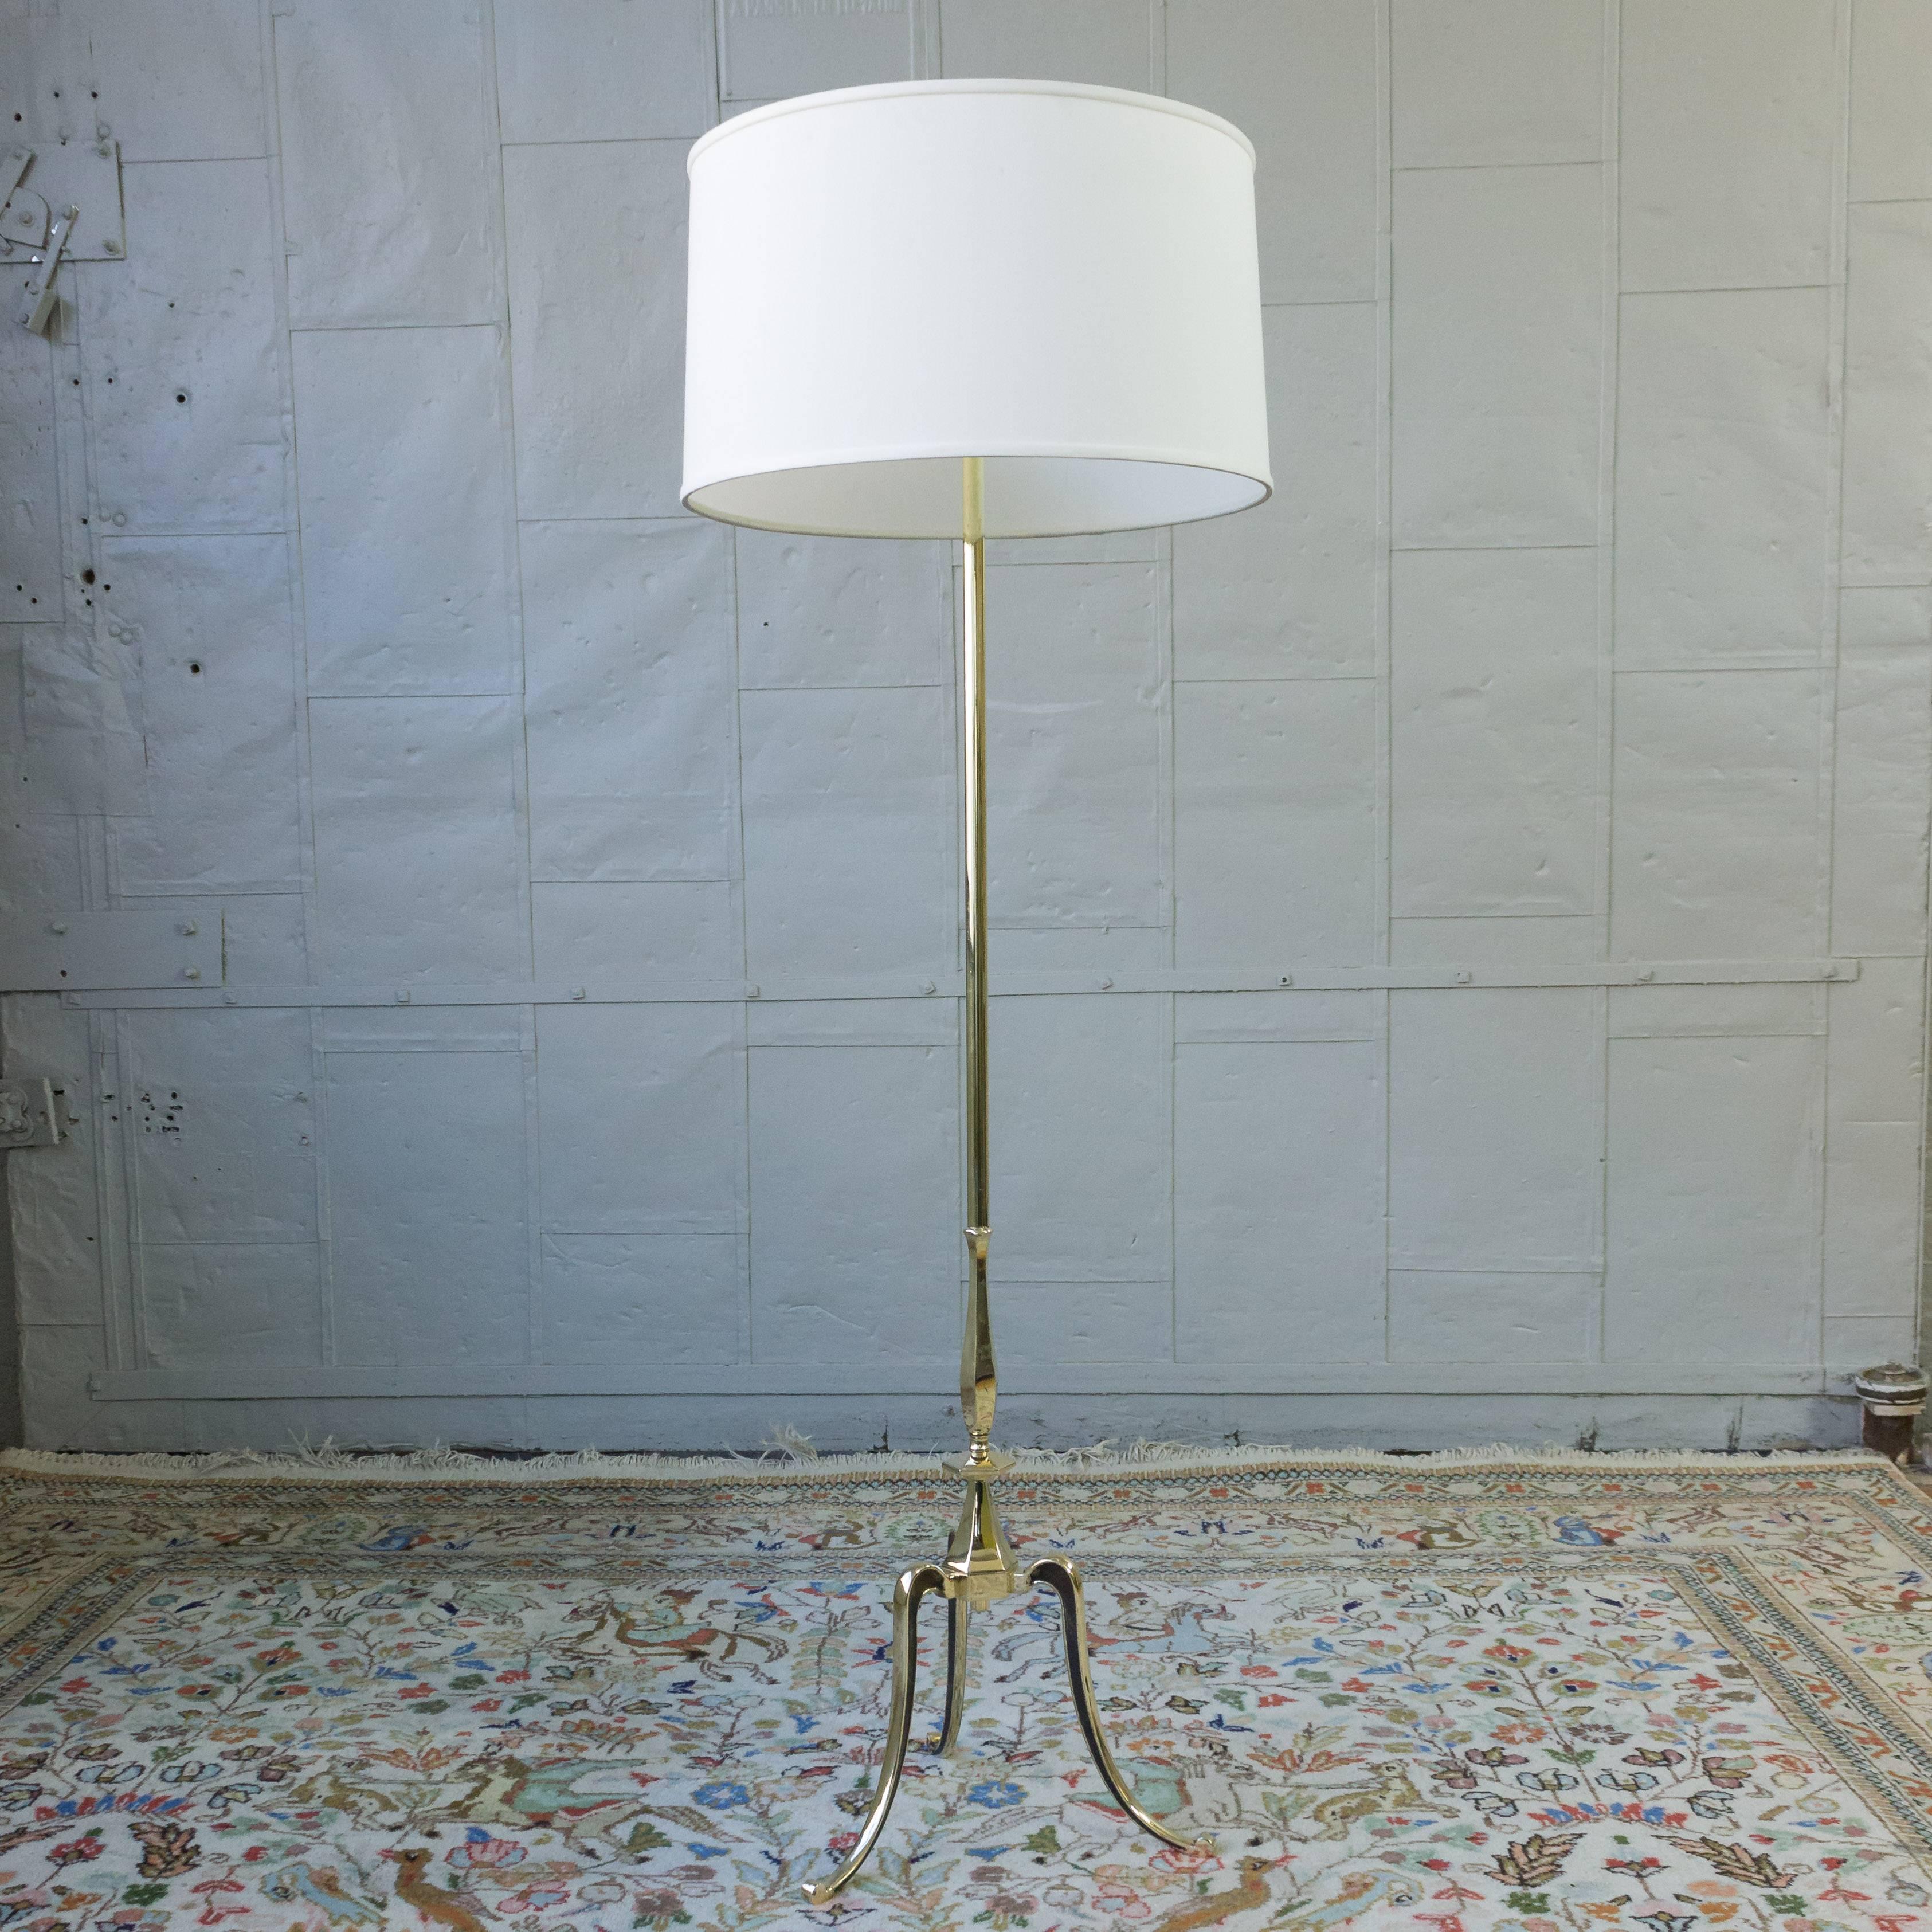 French 1950s polished brass floor lamp with an elegant tripod base. Recently polished and wired.

Not sold with shade (photographed with 12 inch H x 18 inch Diameter shade).